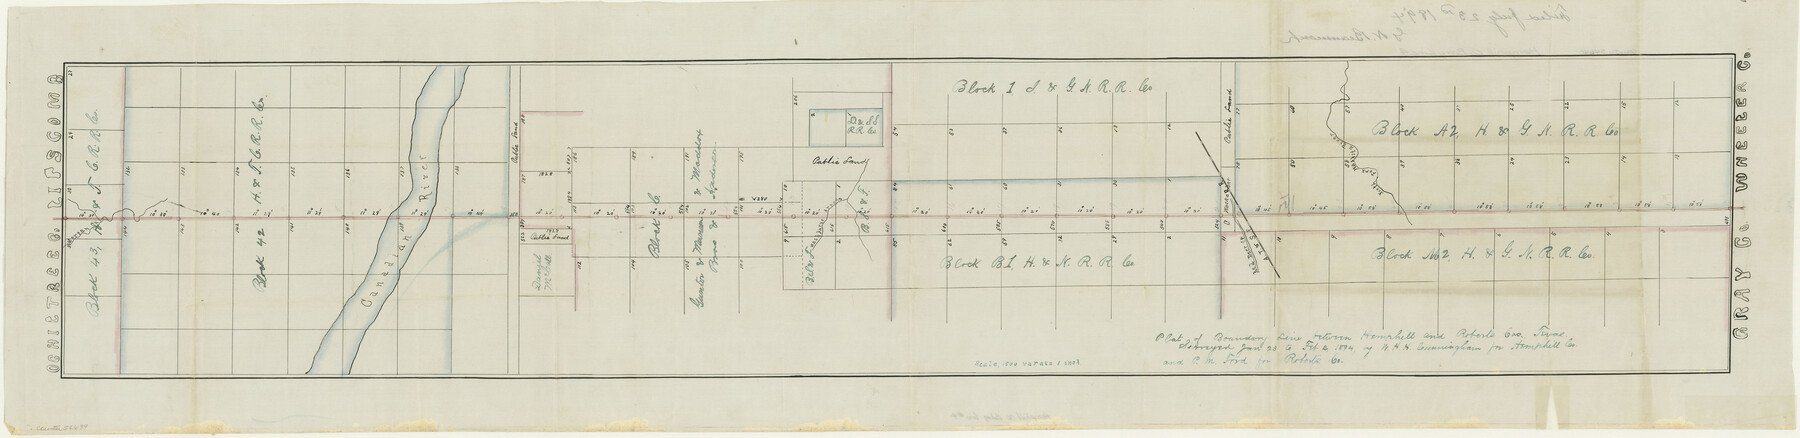 54639, Hemphill County Boundary File 4, General Map Collection